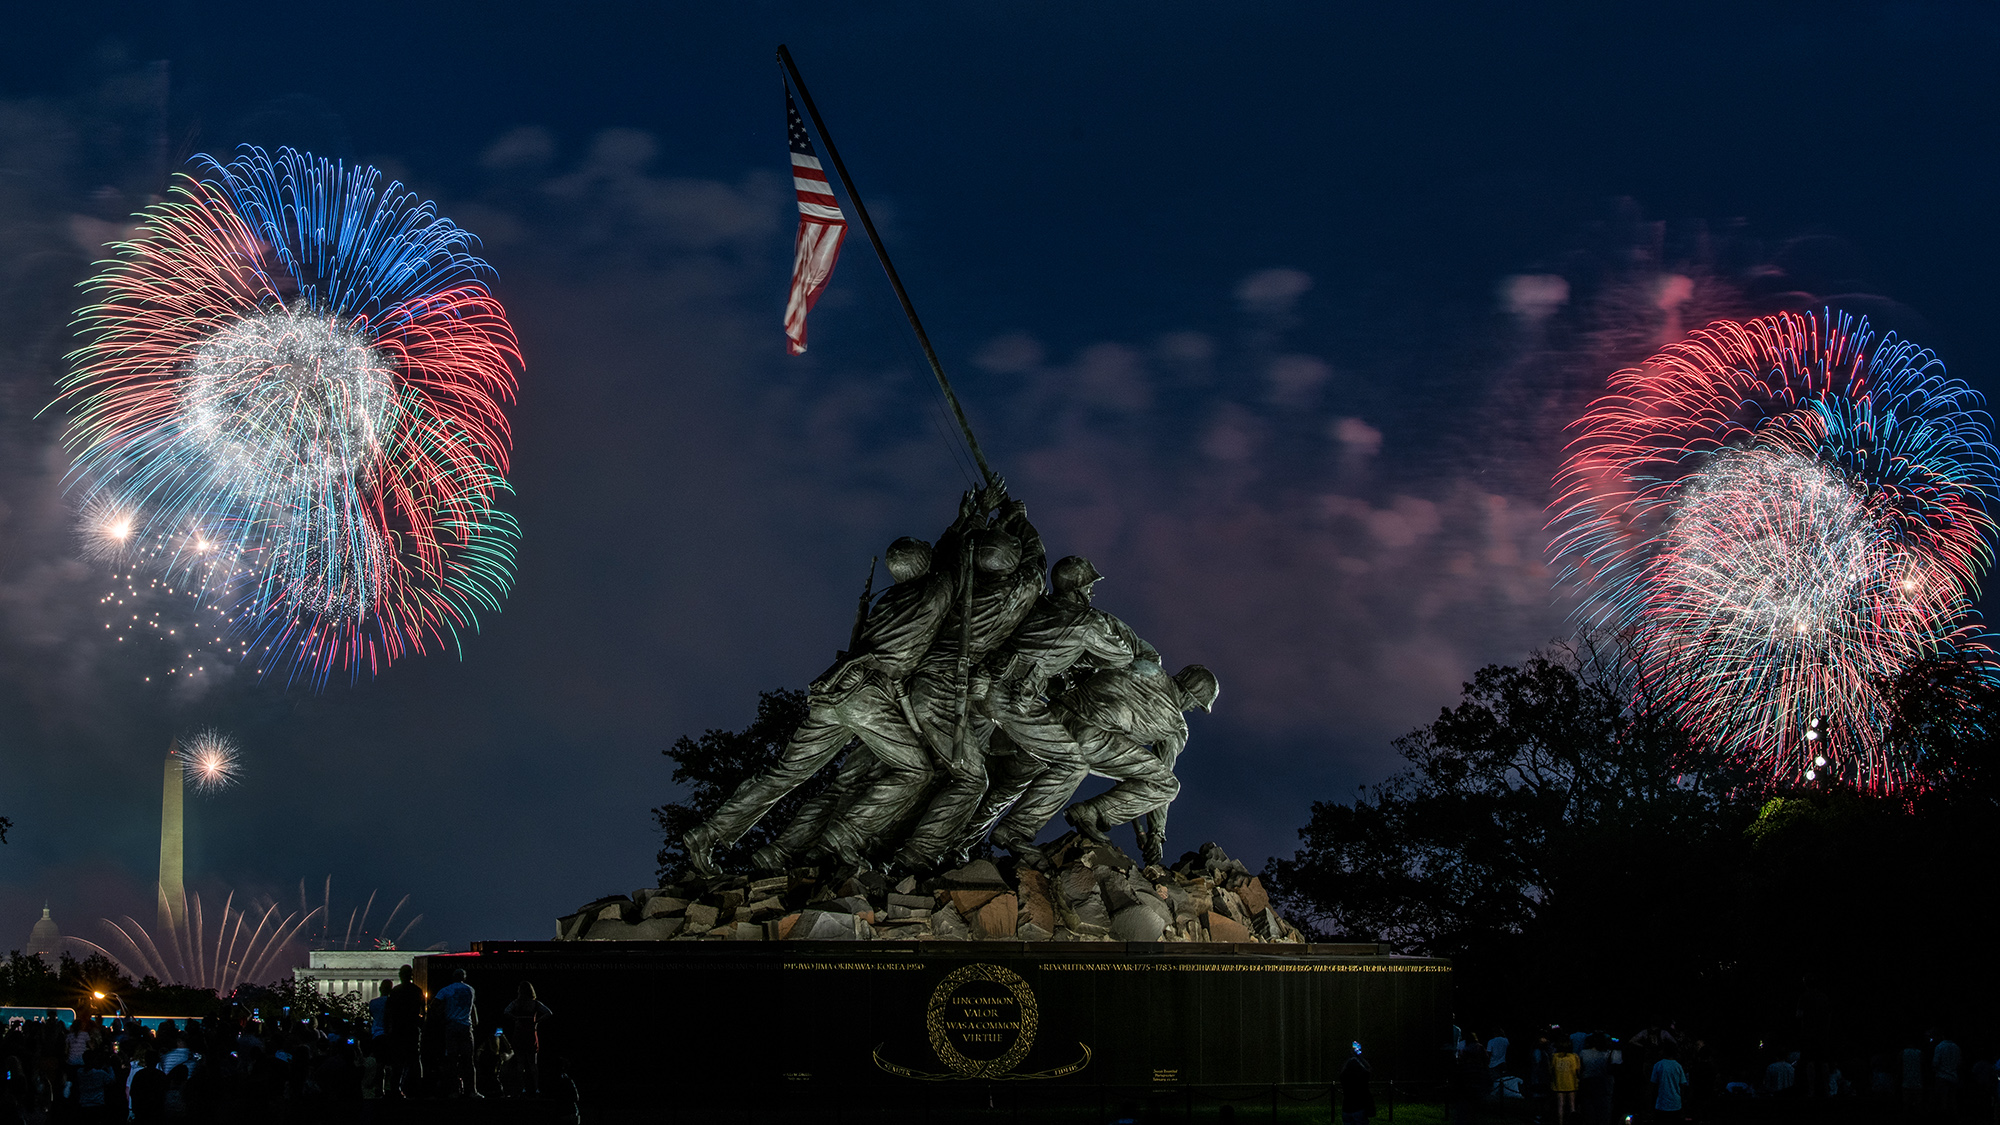 independence-day-celebration-with-dual-fireworks-are-seen-from-the-iwo-jim-2021.jpg